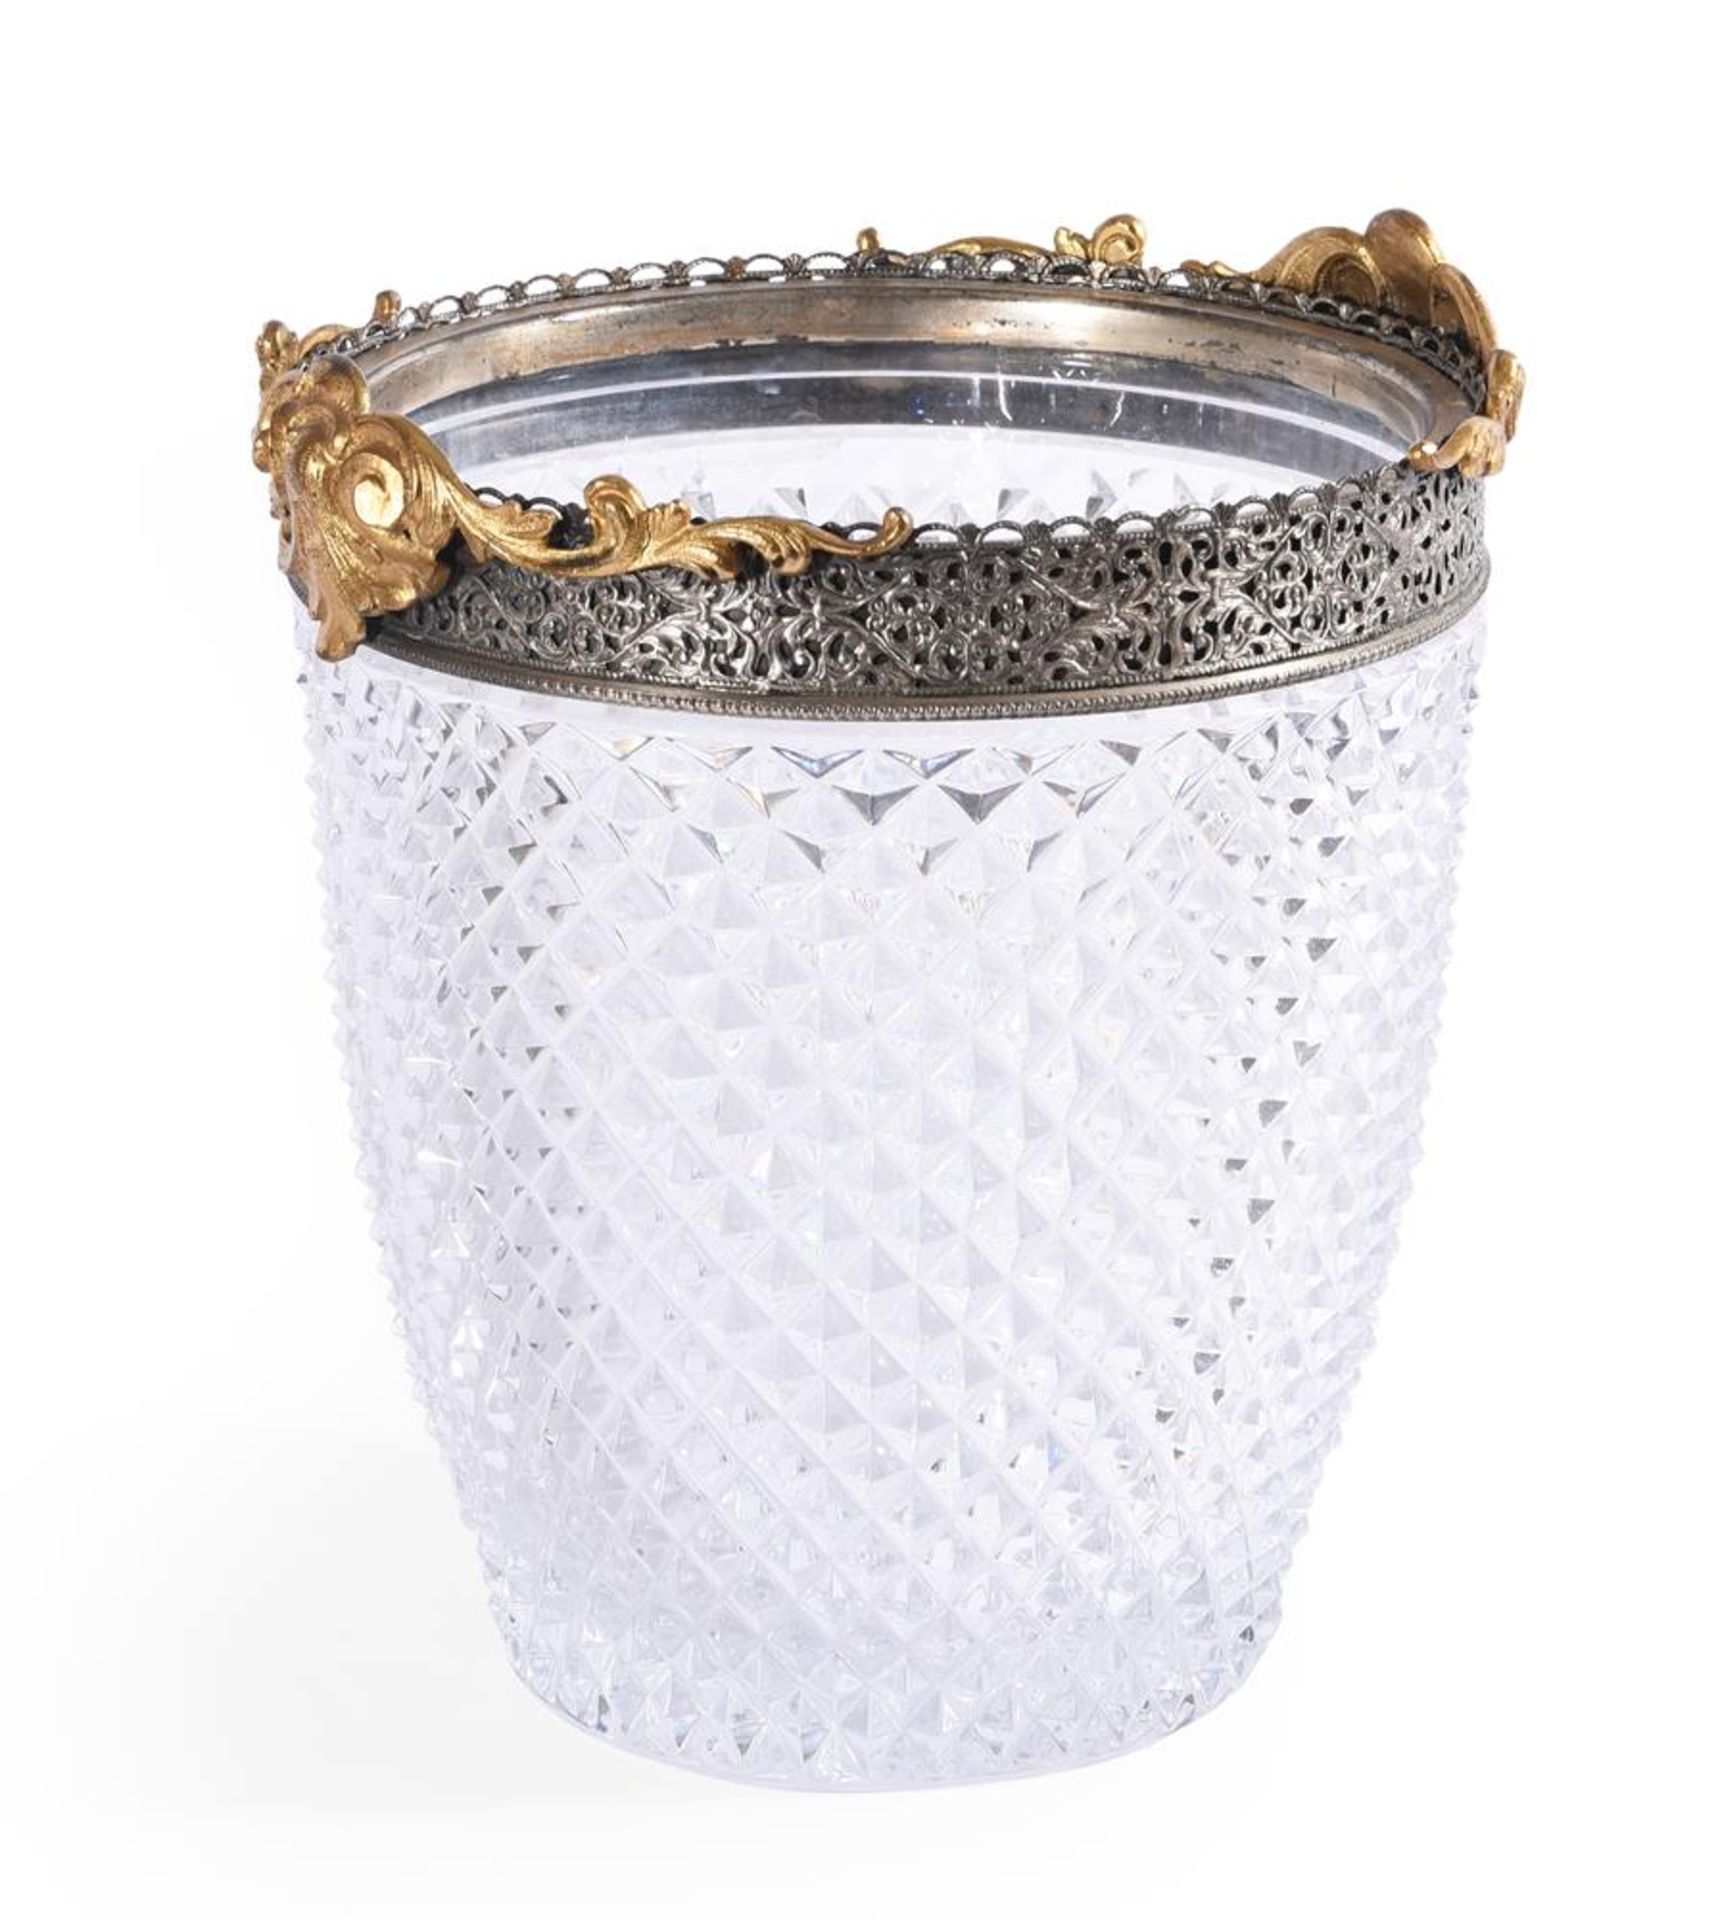 A MODERN CONTINENTAL CUT GLASS AND GILT METAL MOUNTED CHAMPAGNE BUCKET